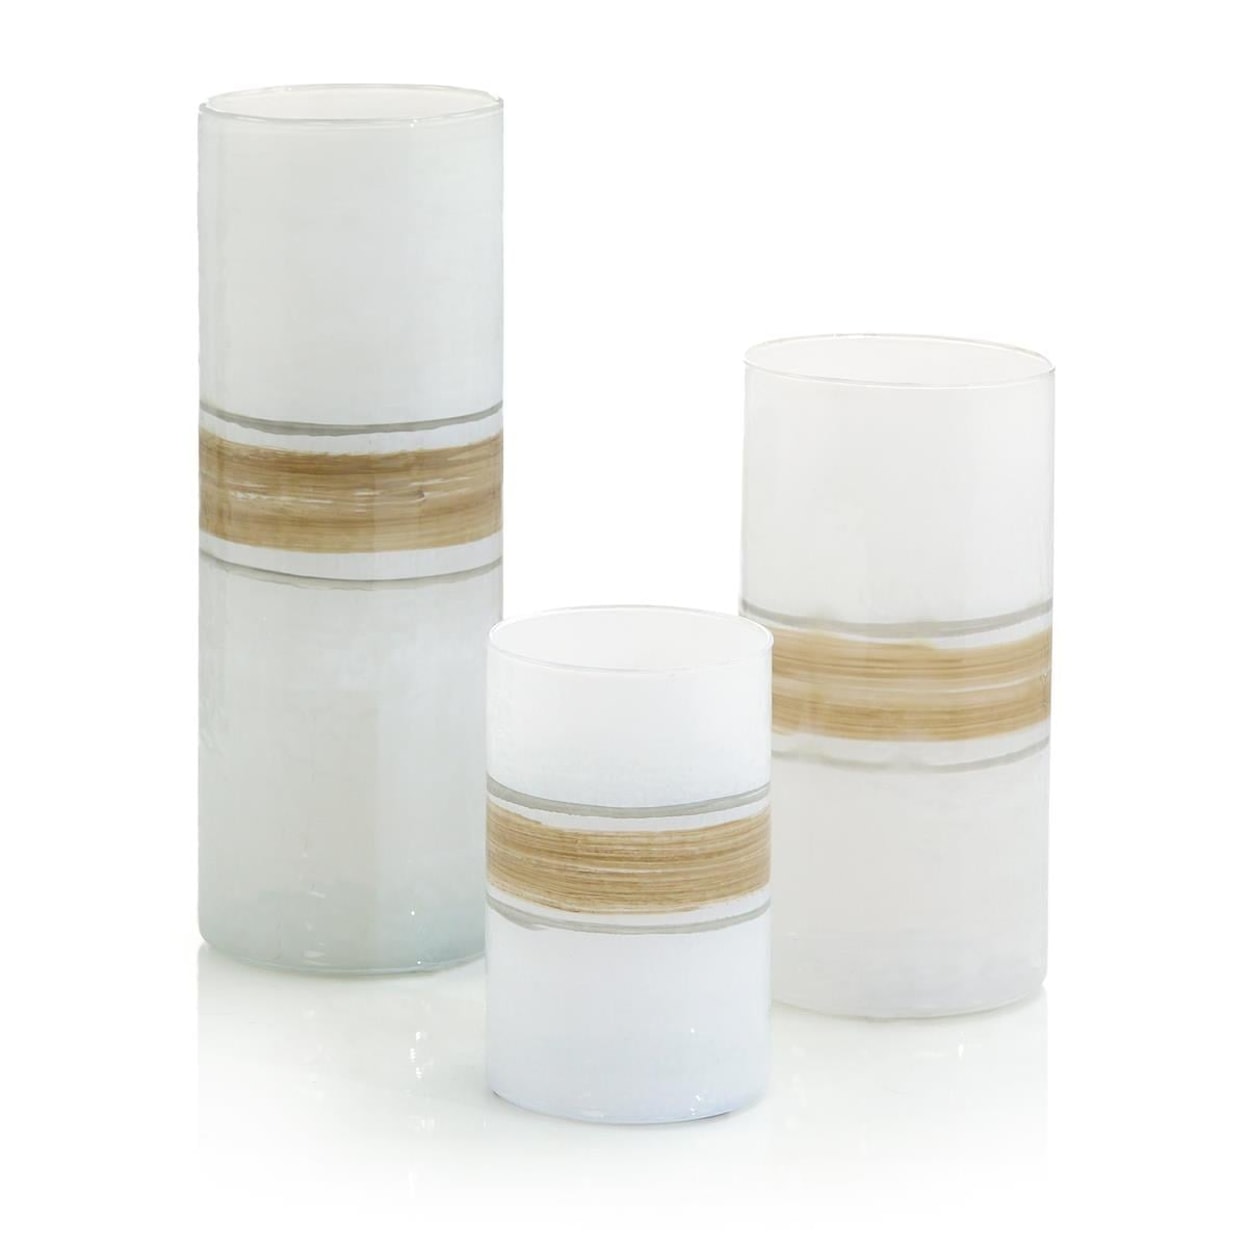 John-Richard Accessories & Botanicals White Frosted Glass Vases S/3